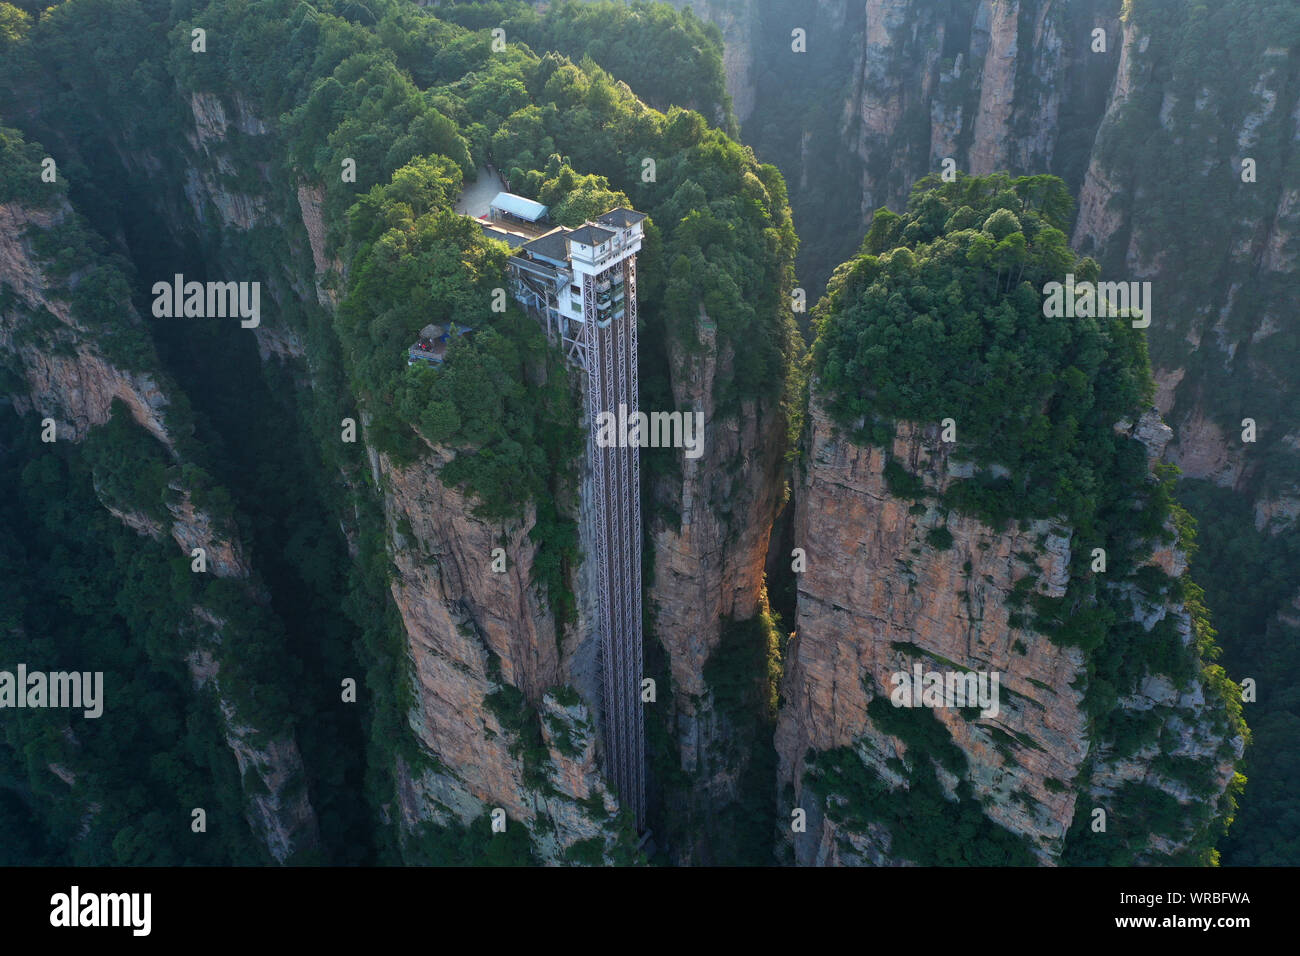 An aerial view of the Bailong Elevator, also known as the Hundred Dragons  Elevator, in the Wulingyuan area of Zhangijiajie scenic spot in Zhangjiajie  Stock Photo - Alamy